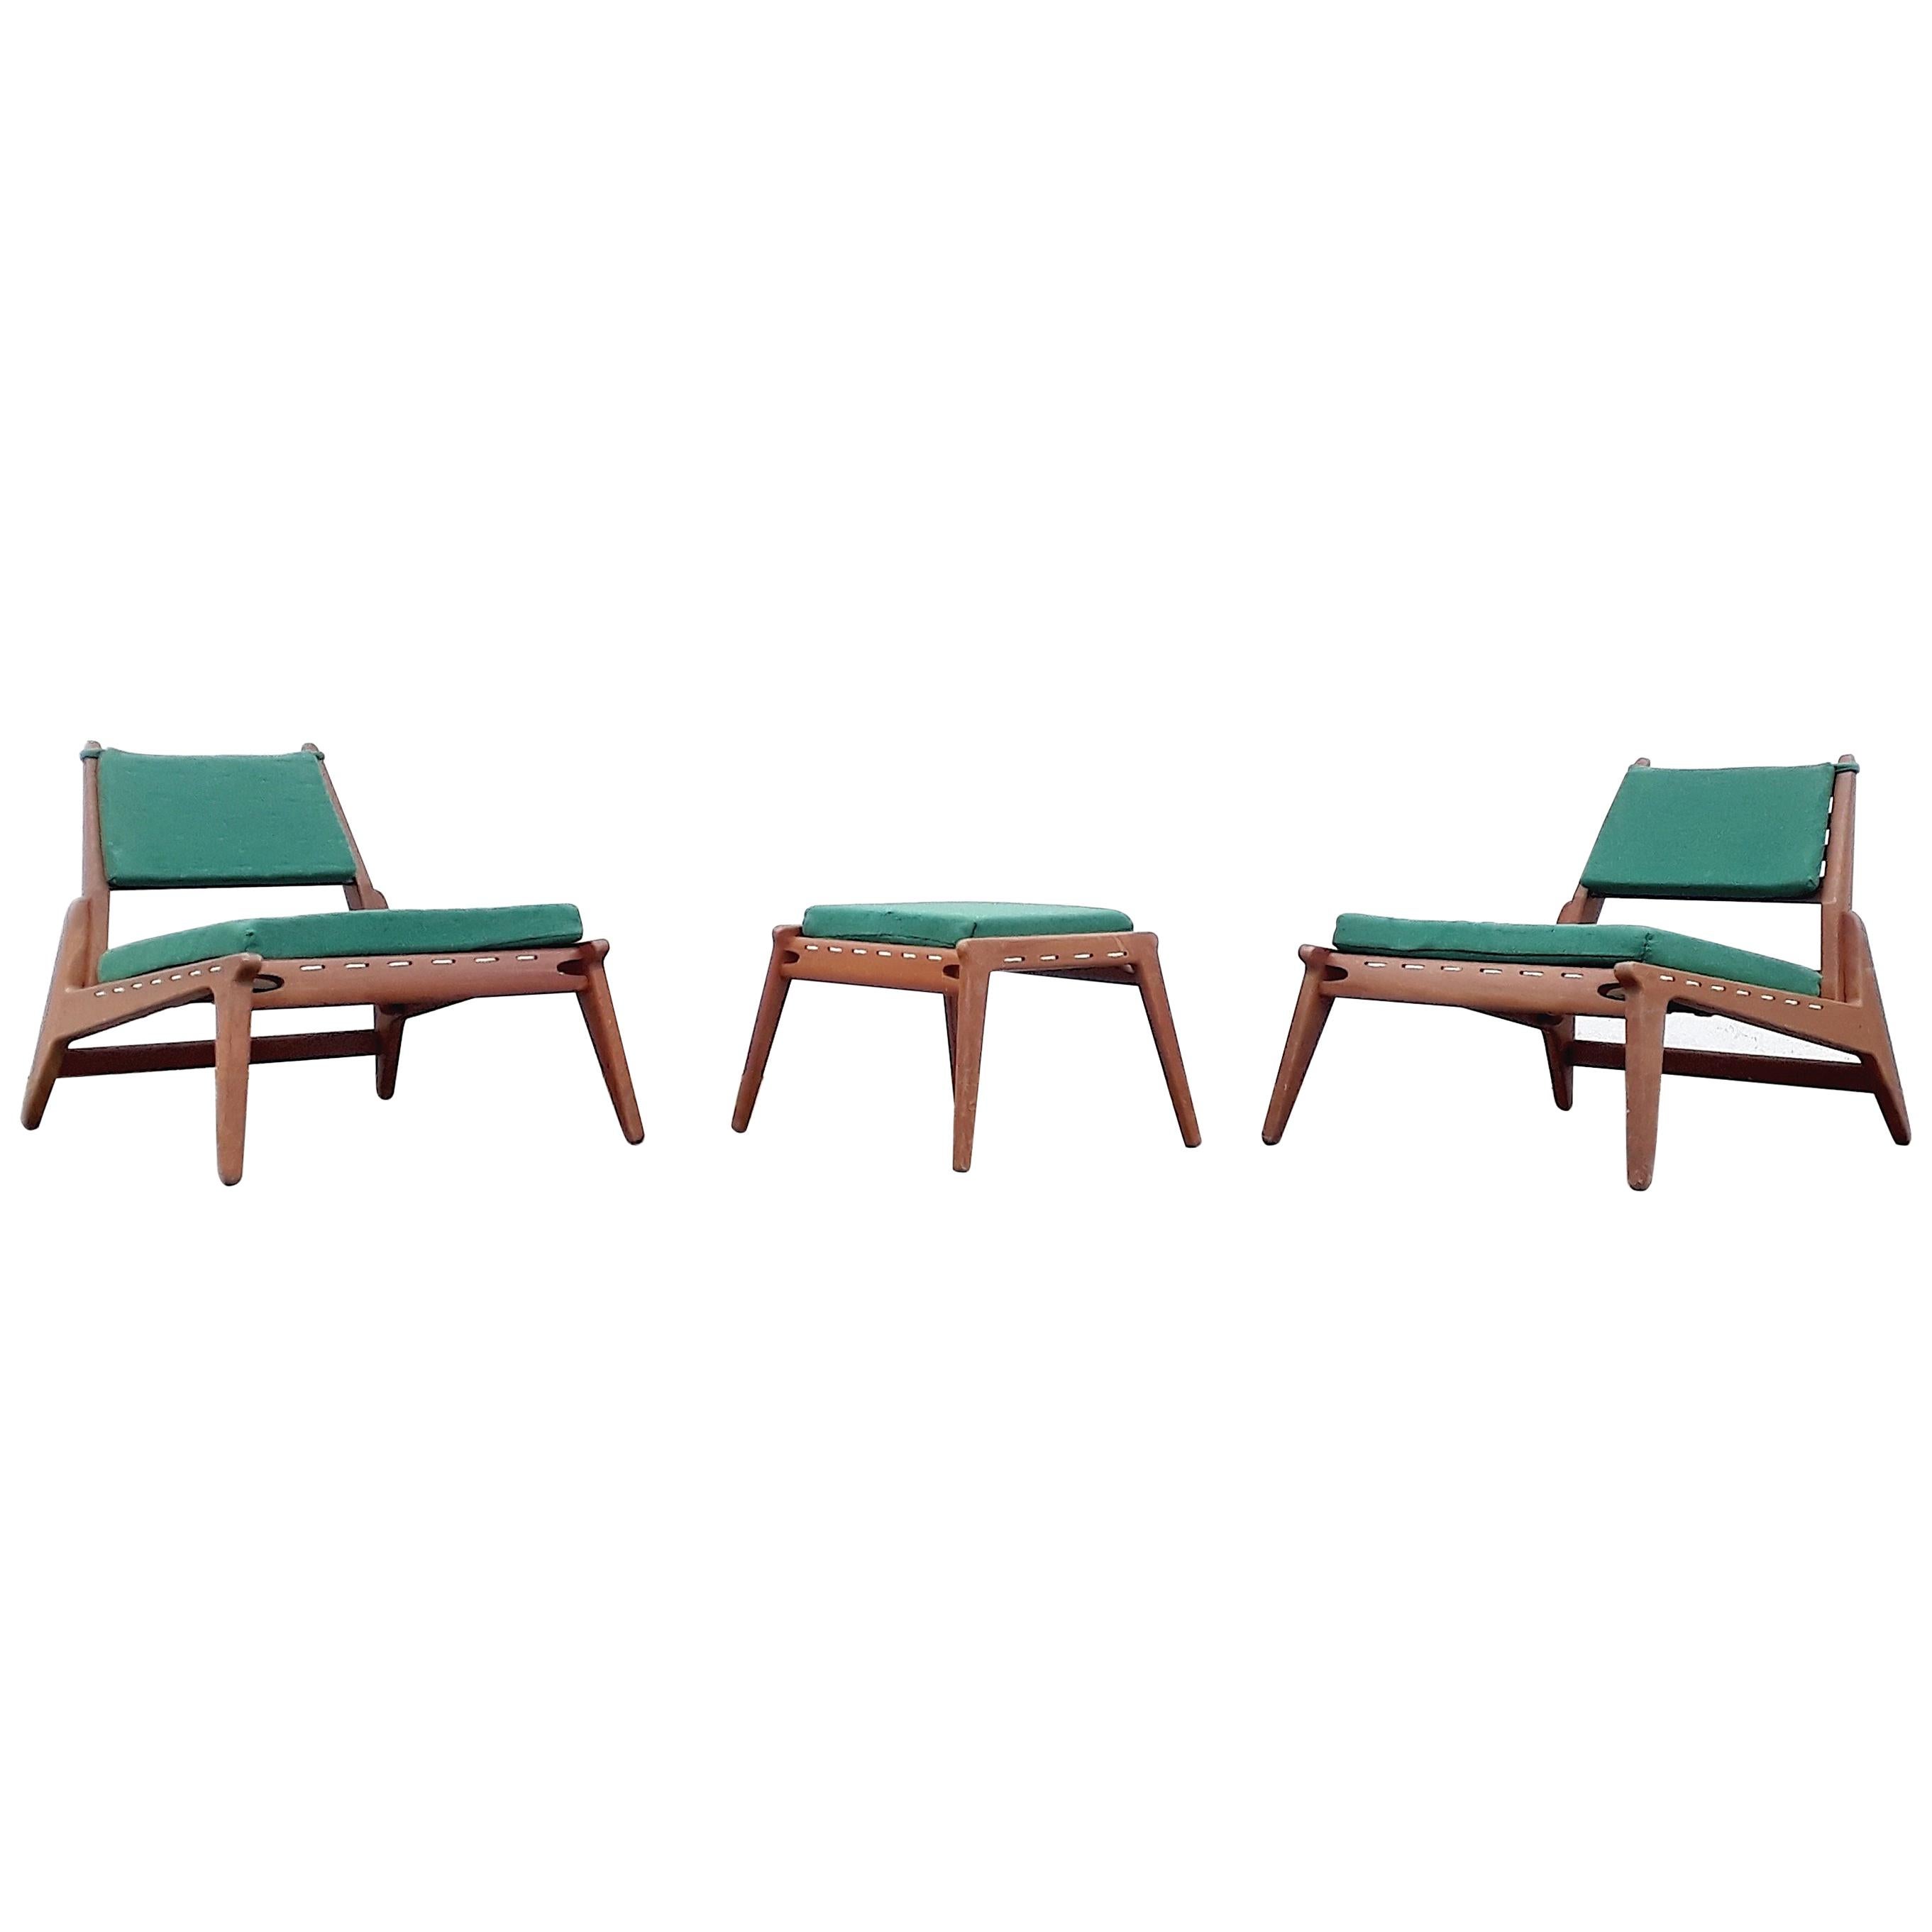 2 German Hunting Chairs Organic Teak Wood Attributed to Otto Frei, 1950s For Sale